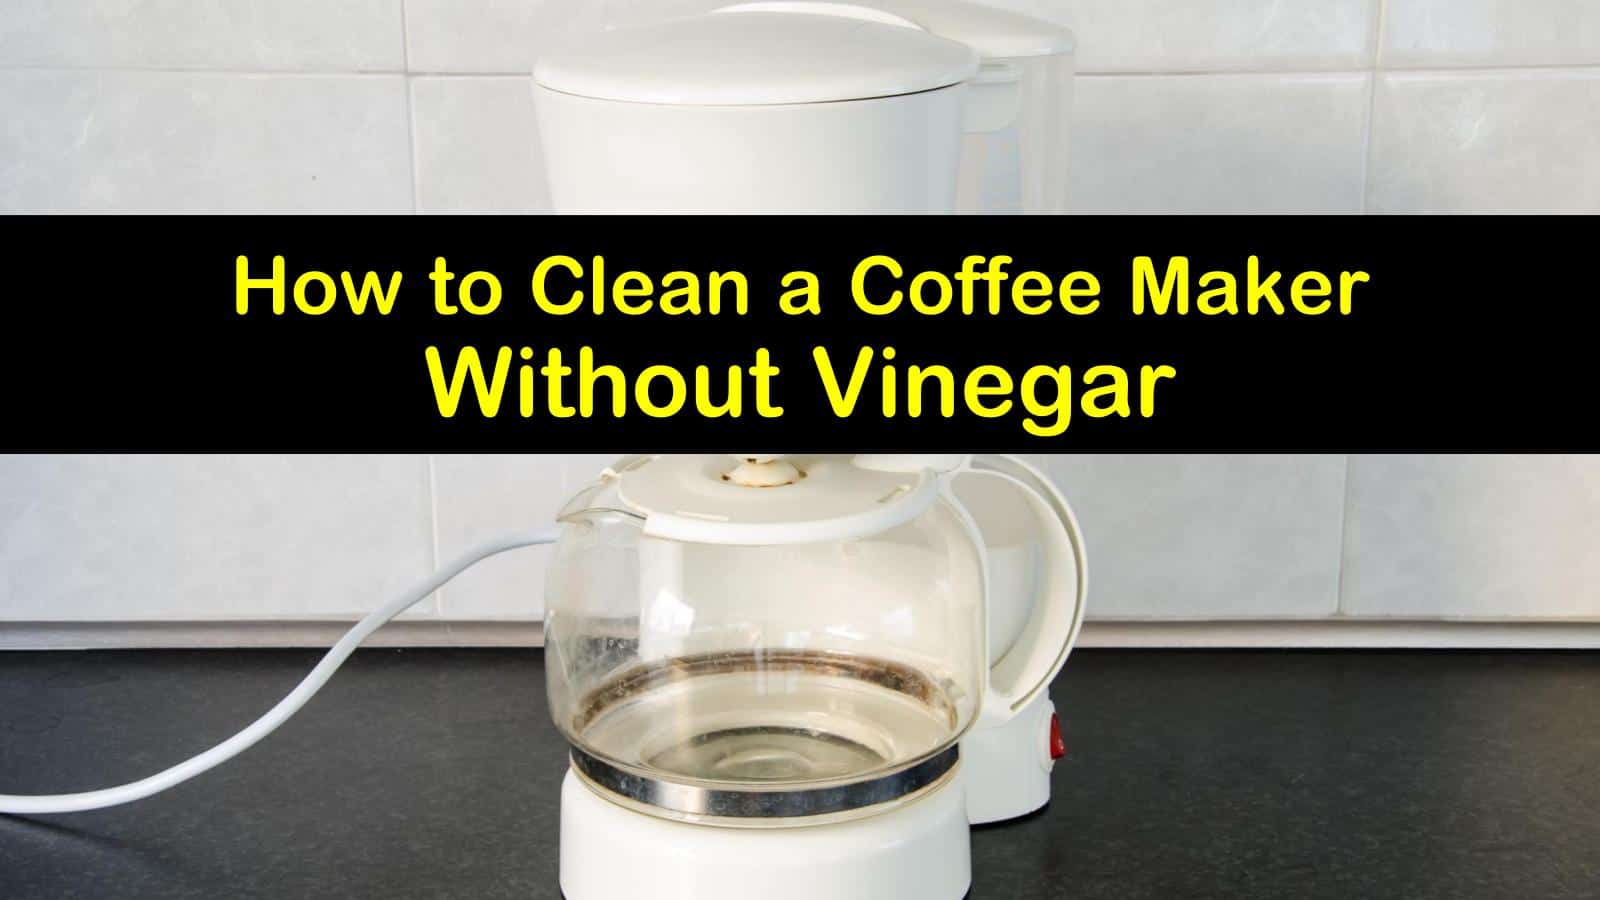 7 Creative Ways To Clean A Coffee Maker Without Vinegar